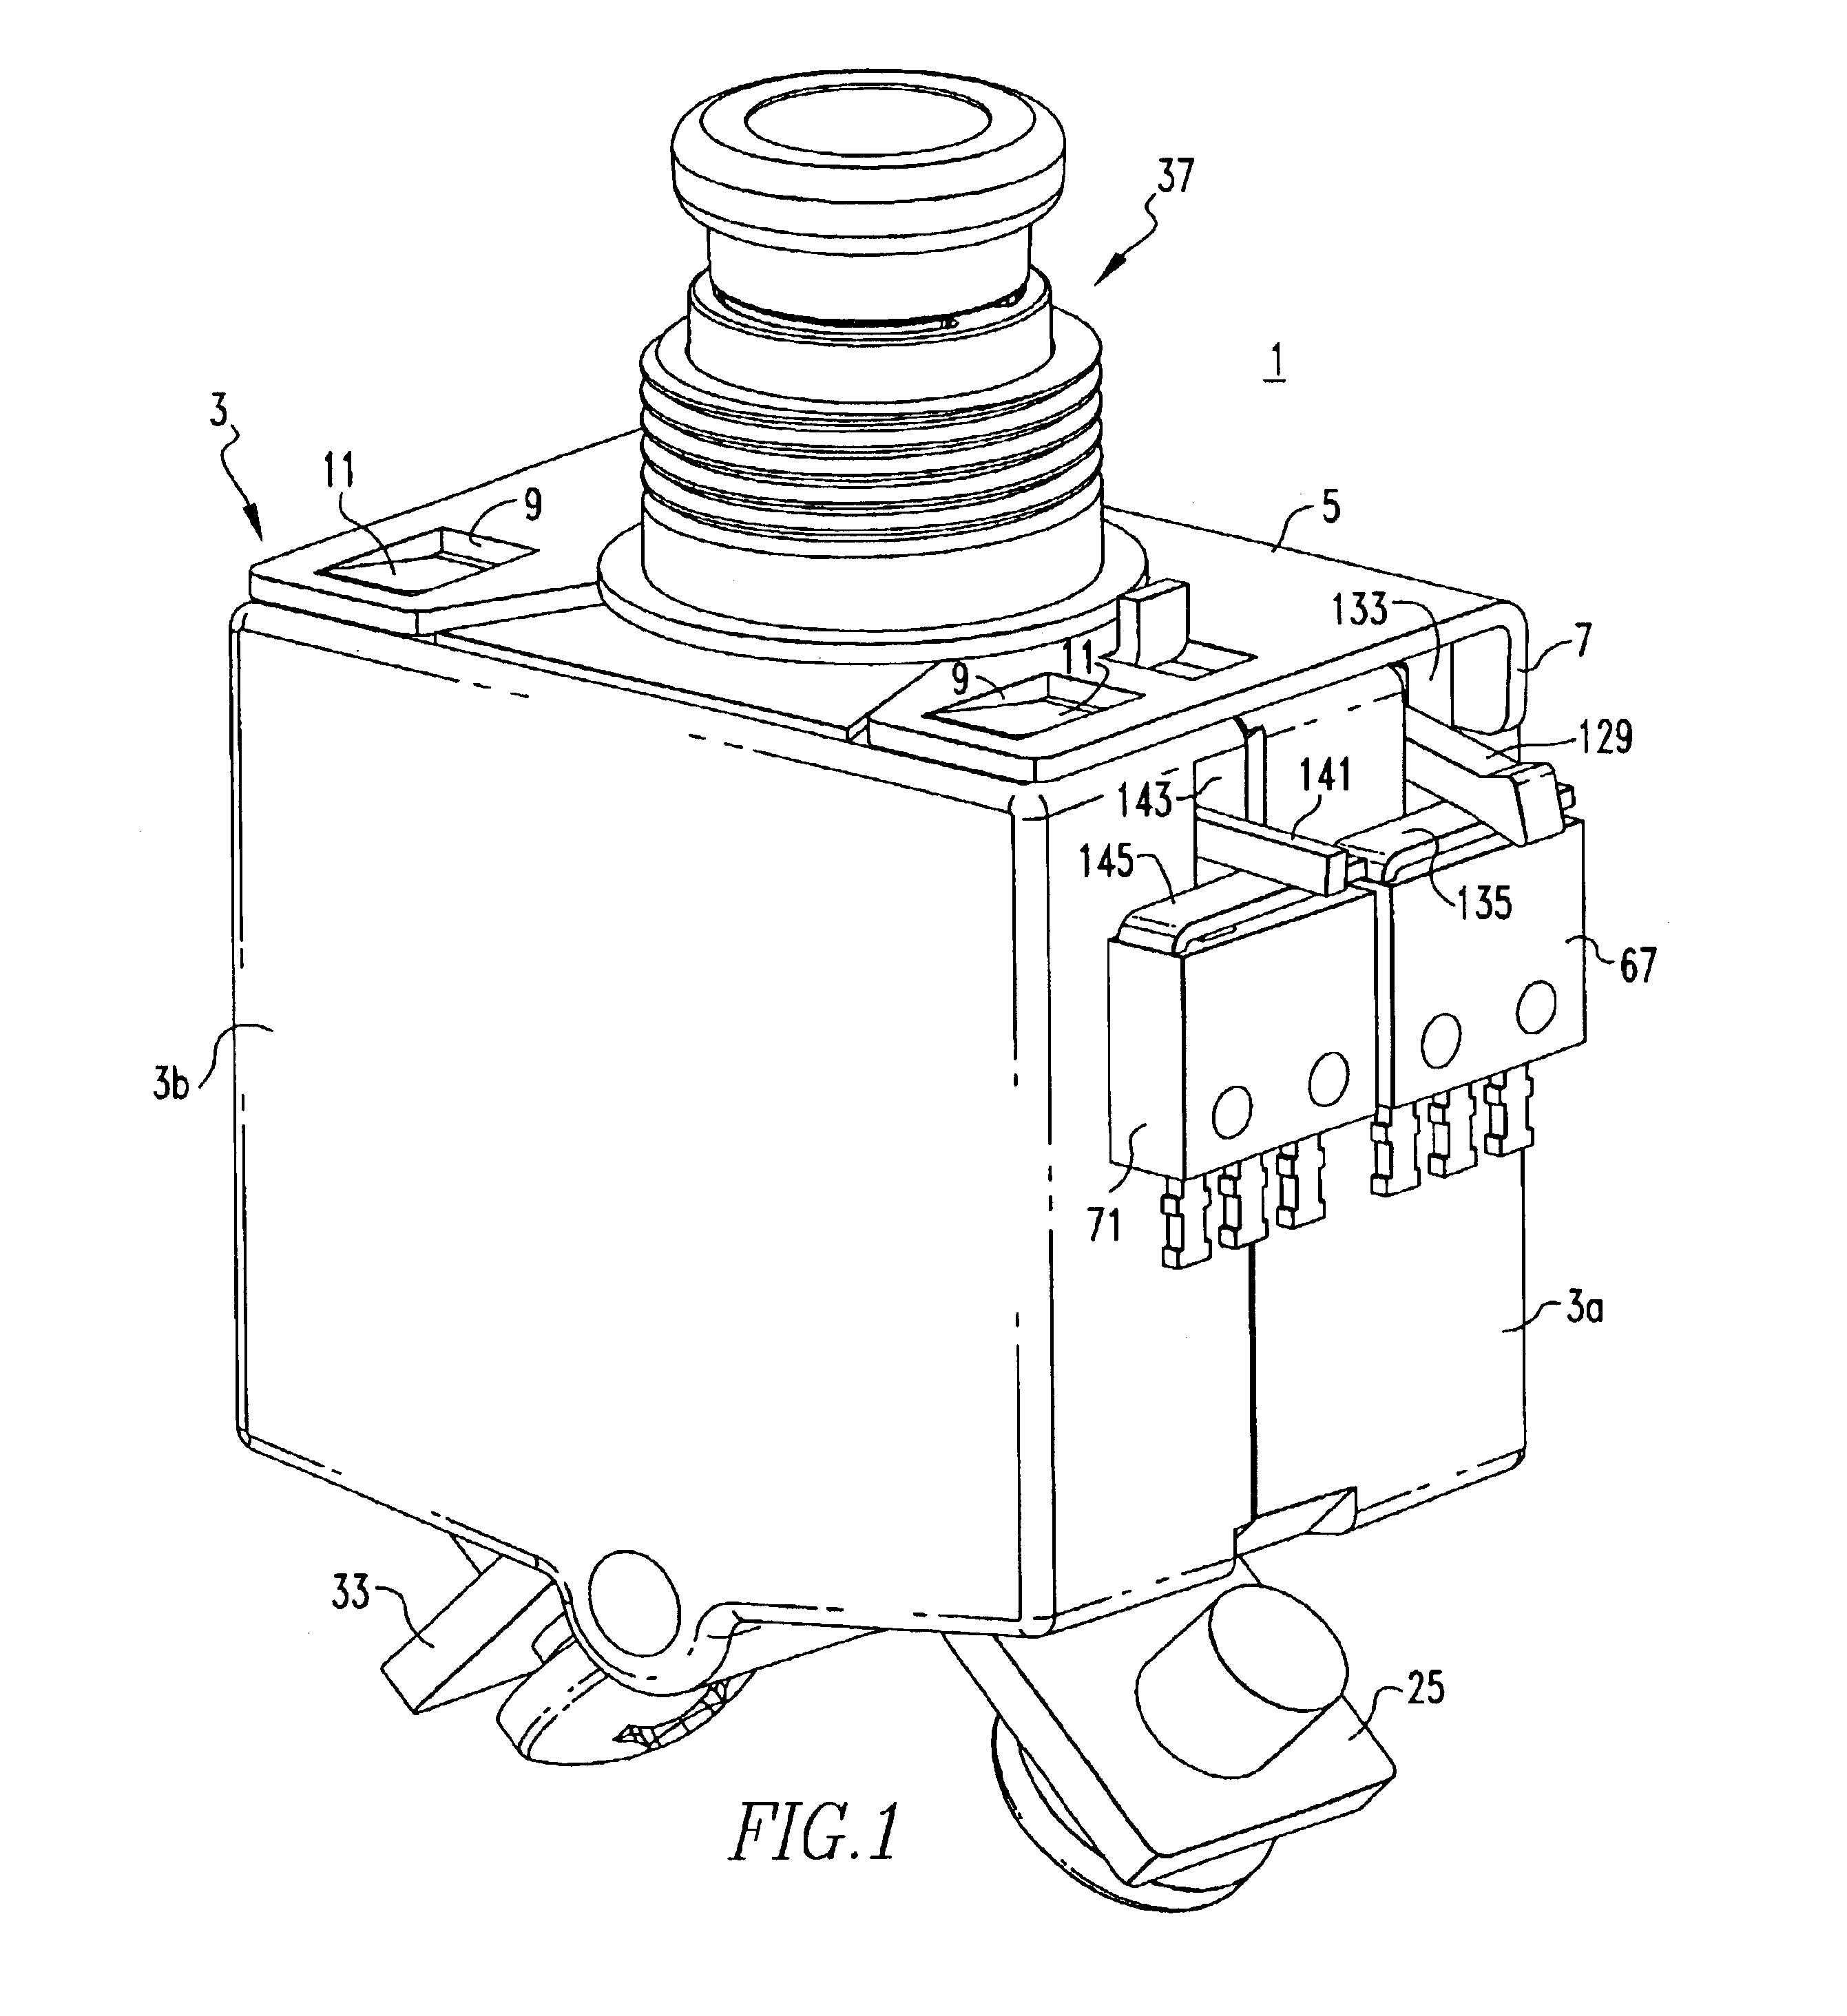 Circuit breaker with auxiliary switches and mechanisms for operating same